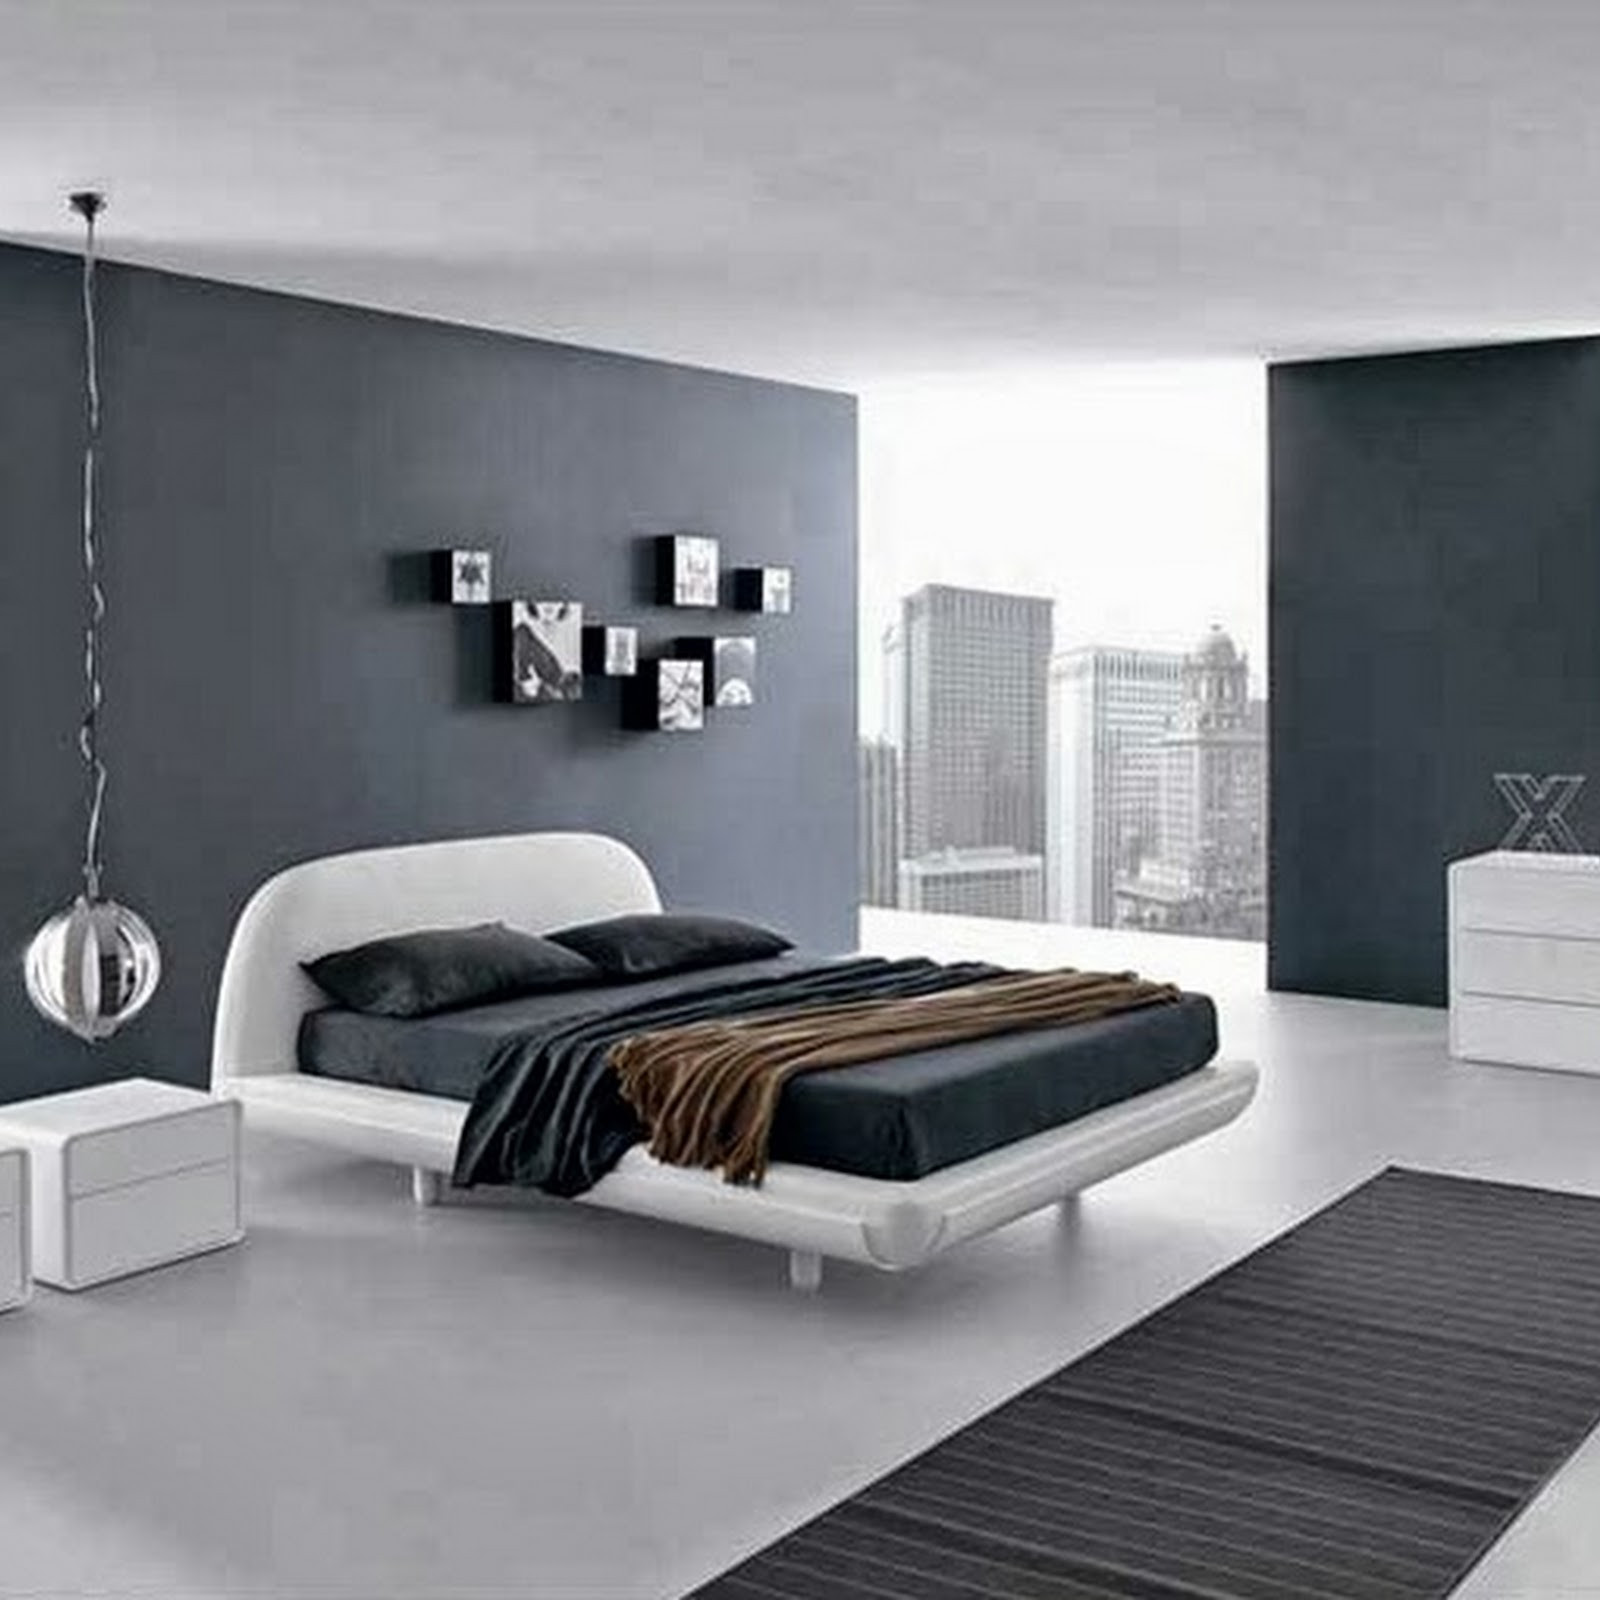 Modern Bedroom Paint Colors
 Elegant Gray Paint Colors for Bedrooms